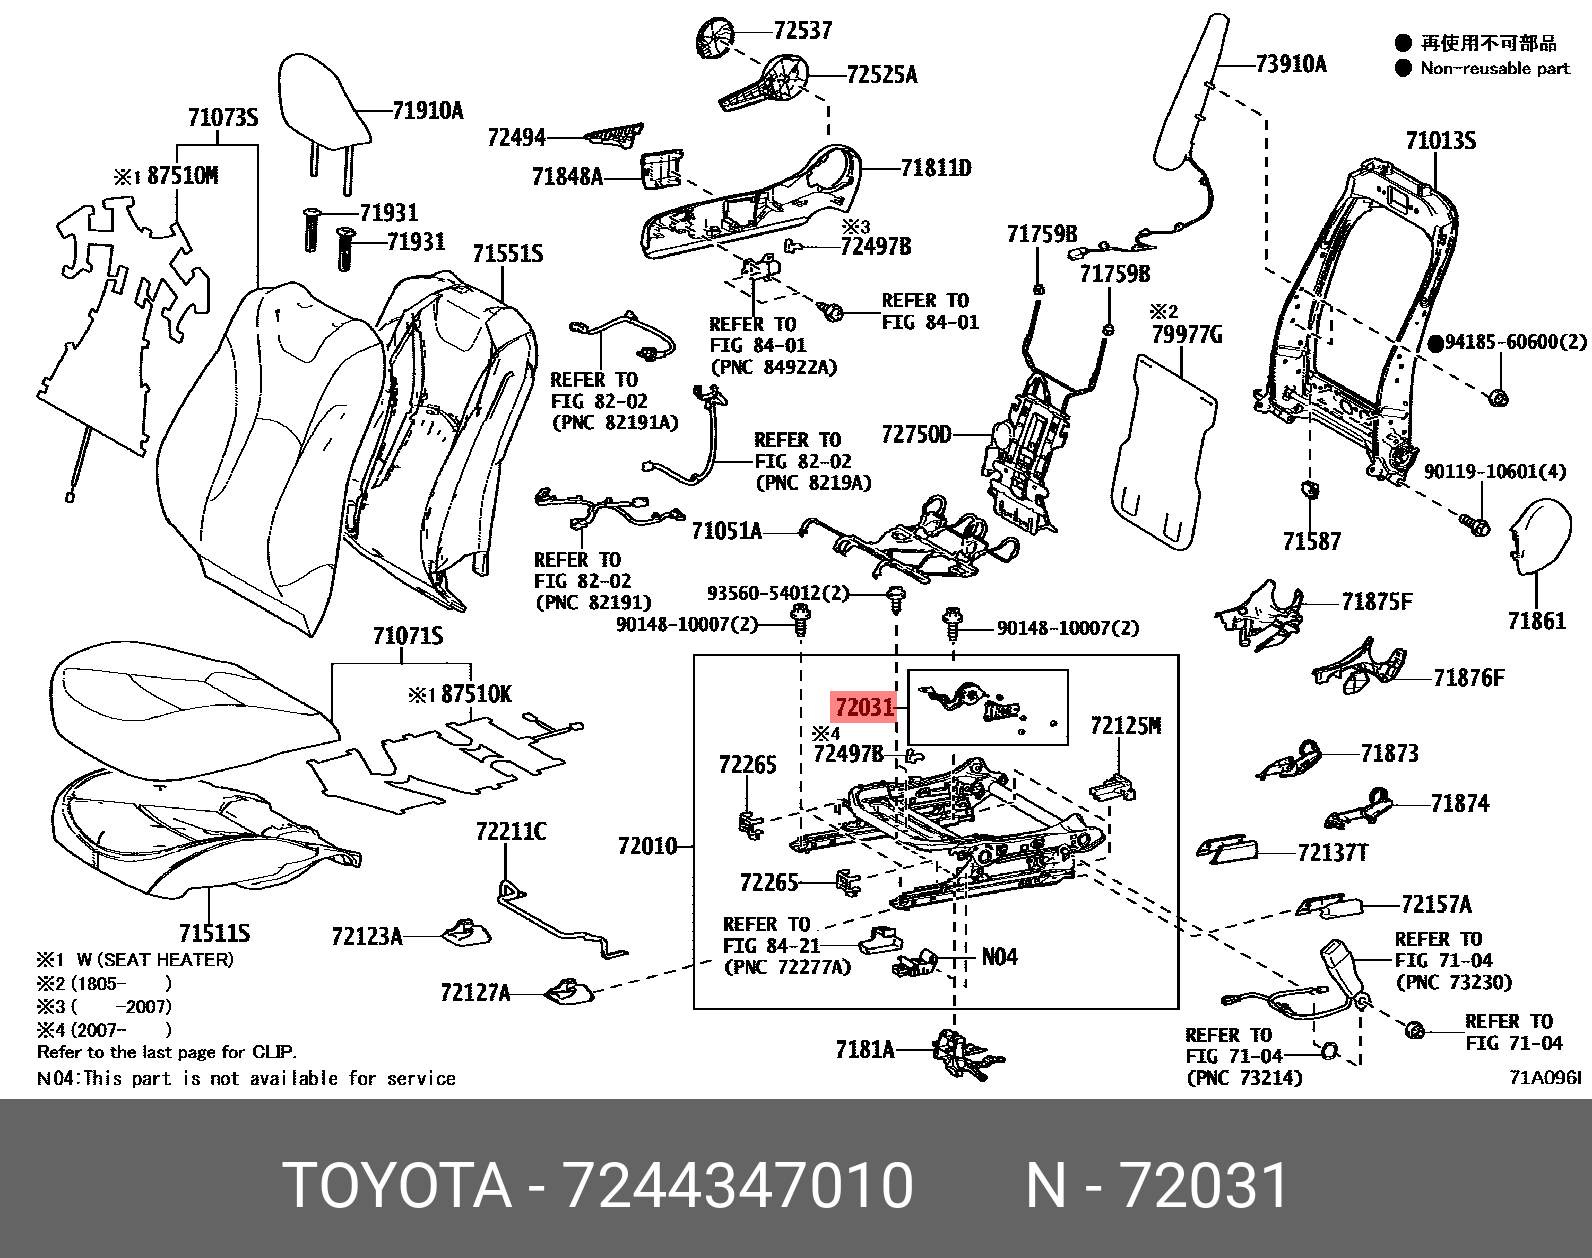 CAMRY 201706-, ADJUSTER ASSY, FRONT SEAT VERTICAL